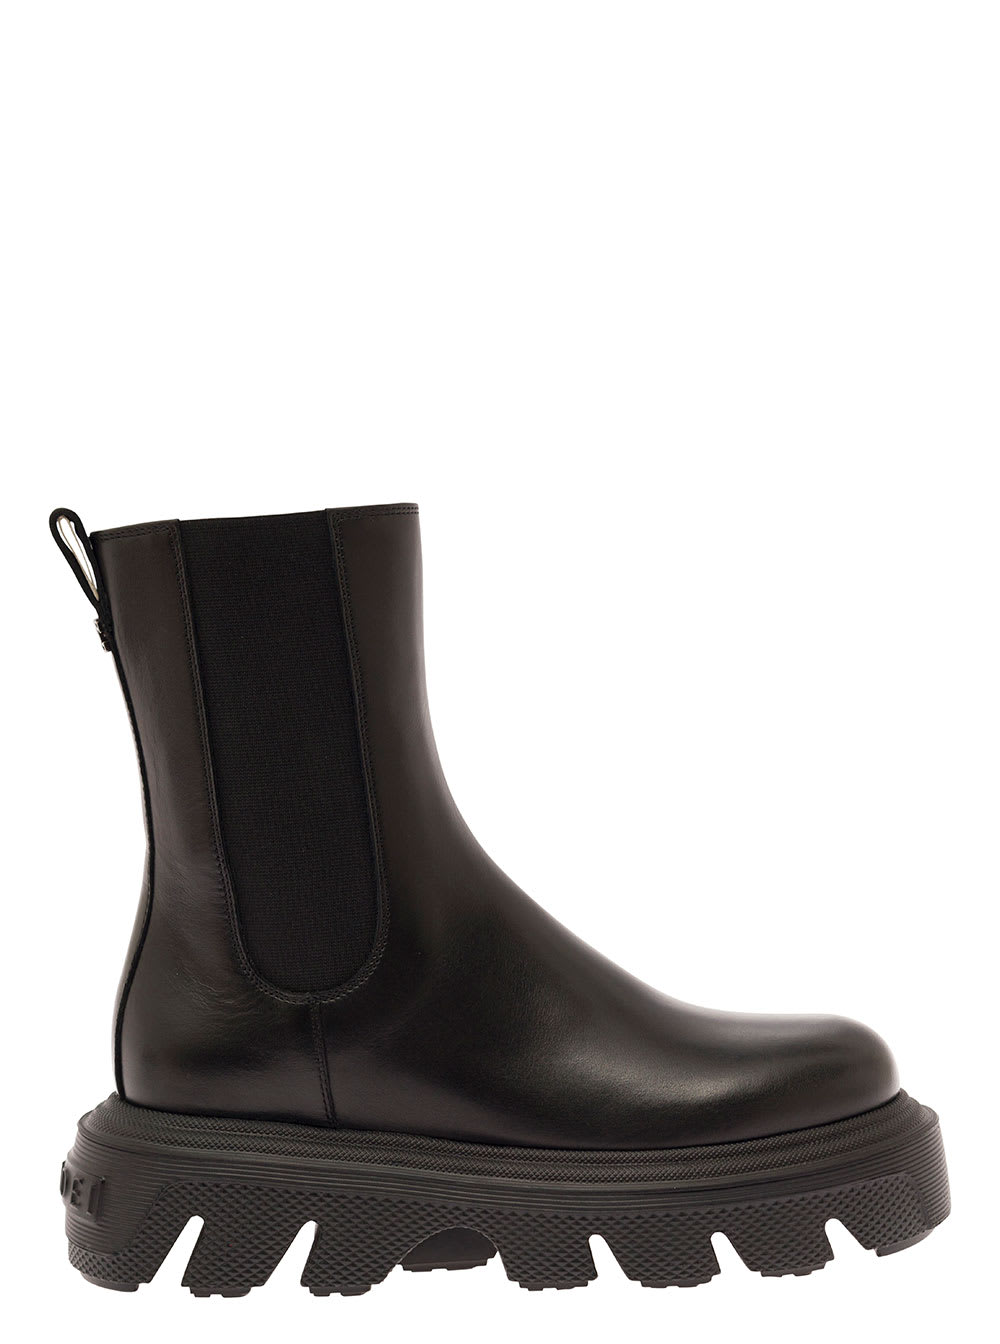 CASADEI GENERATION C BLACK ANKLE BOOTS WITH CHUNKY PLATFORM AND LOGO DETAIL IN LEATHER WOMAN